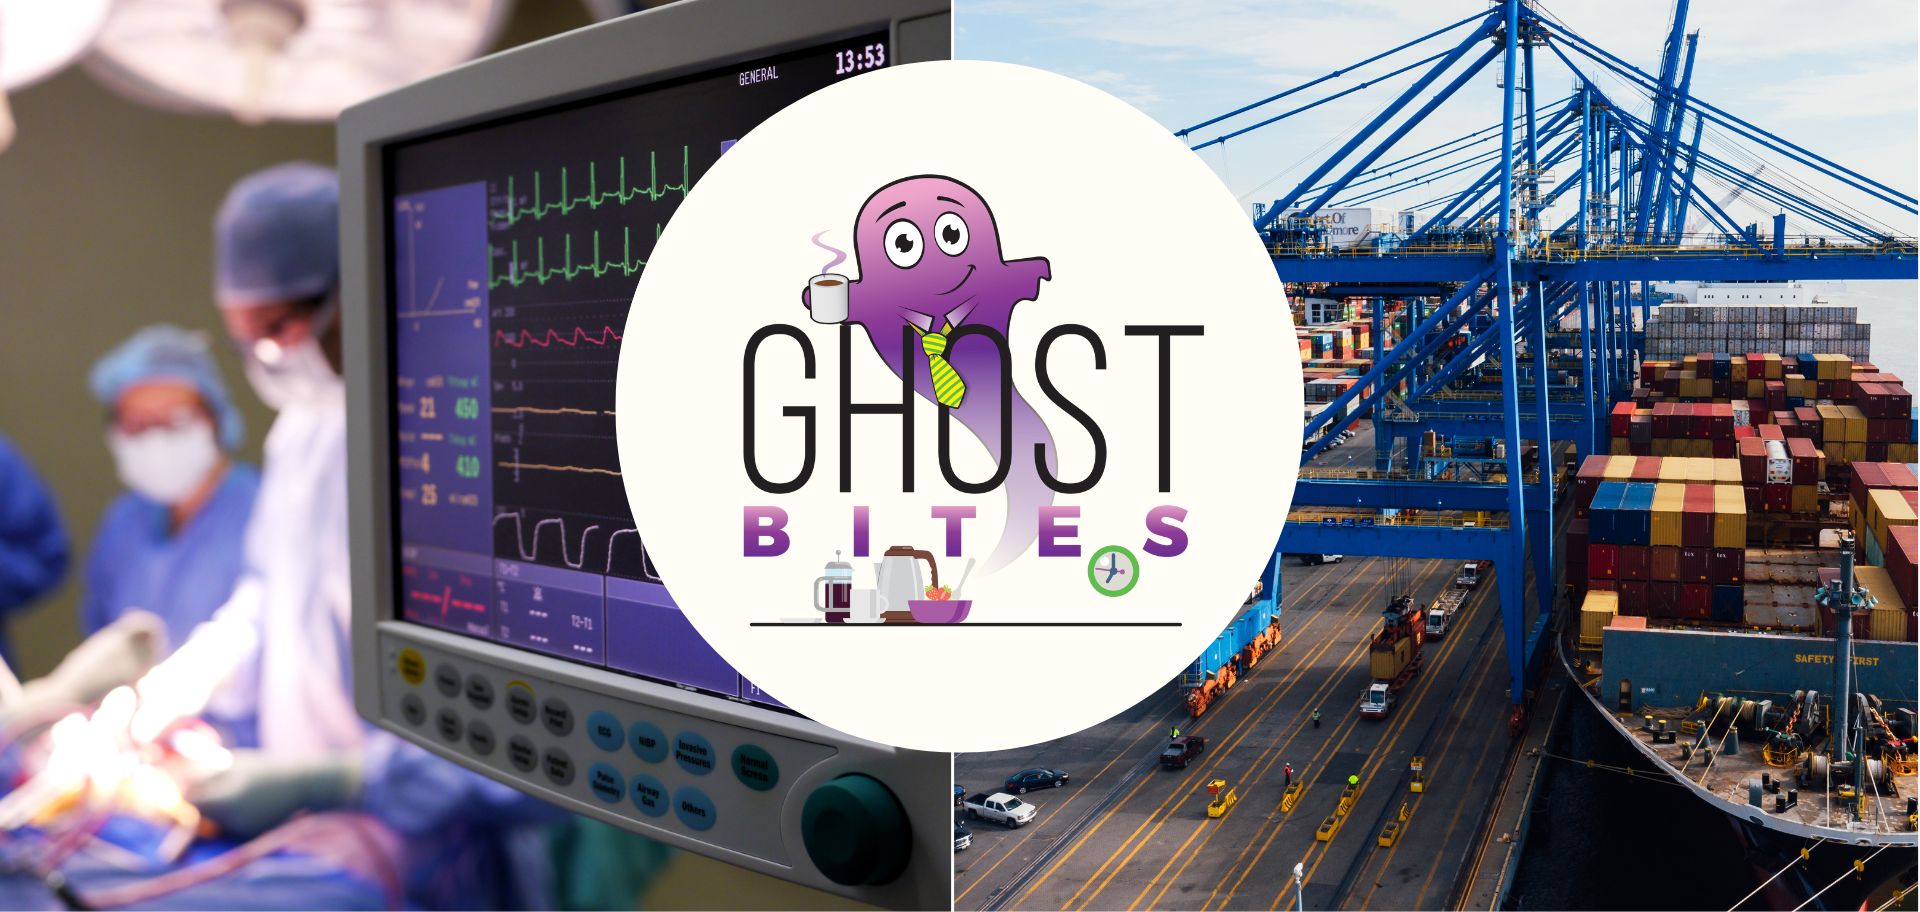 Ghost Bites (Afrimat | Coronation | Datatec | Grindrod Shipping | Investec | Investec Property Fund | Netcare | Purple Group | Sanlam)